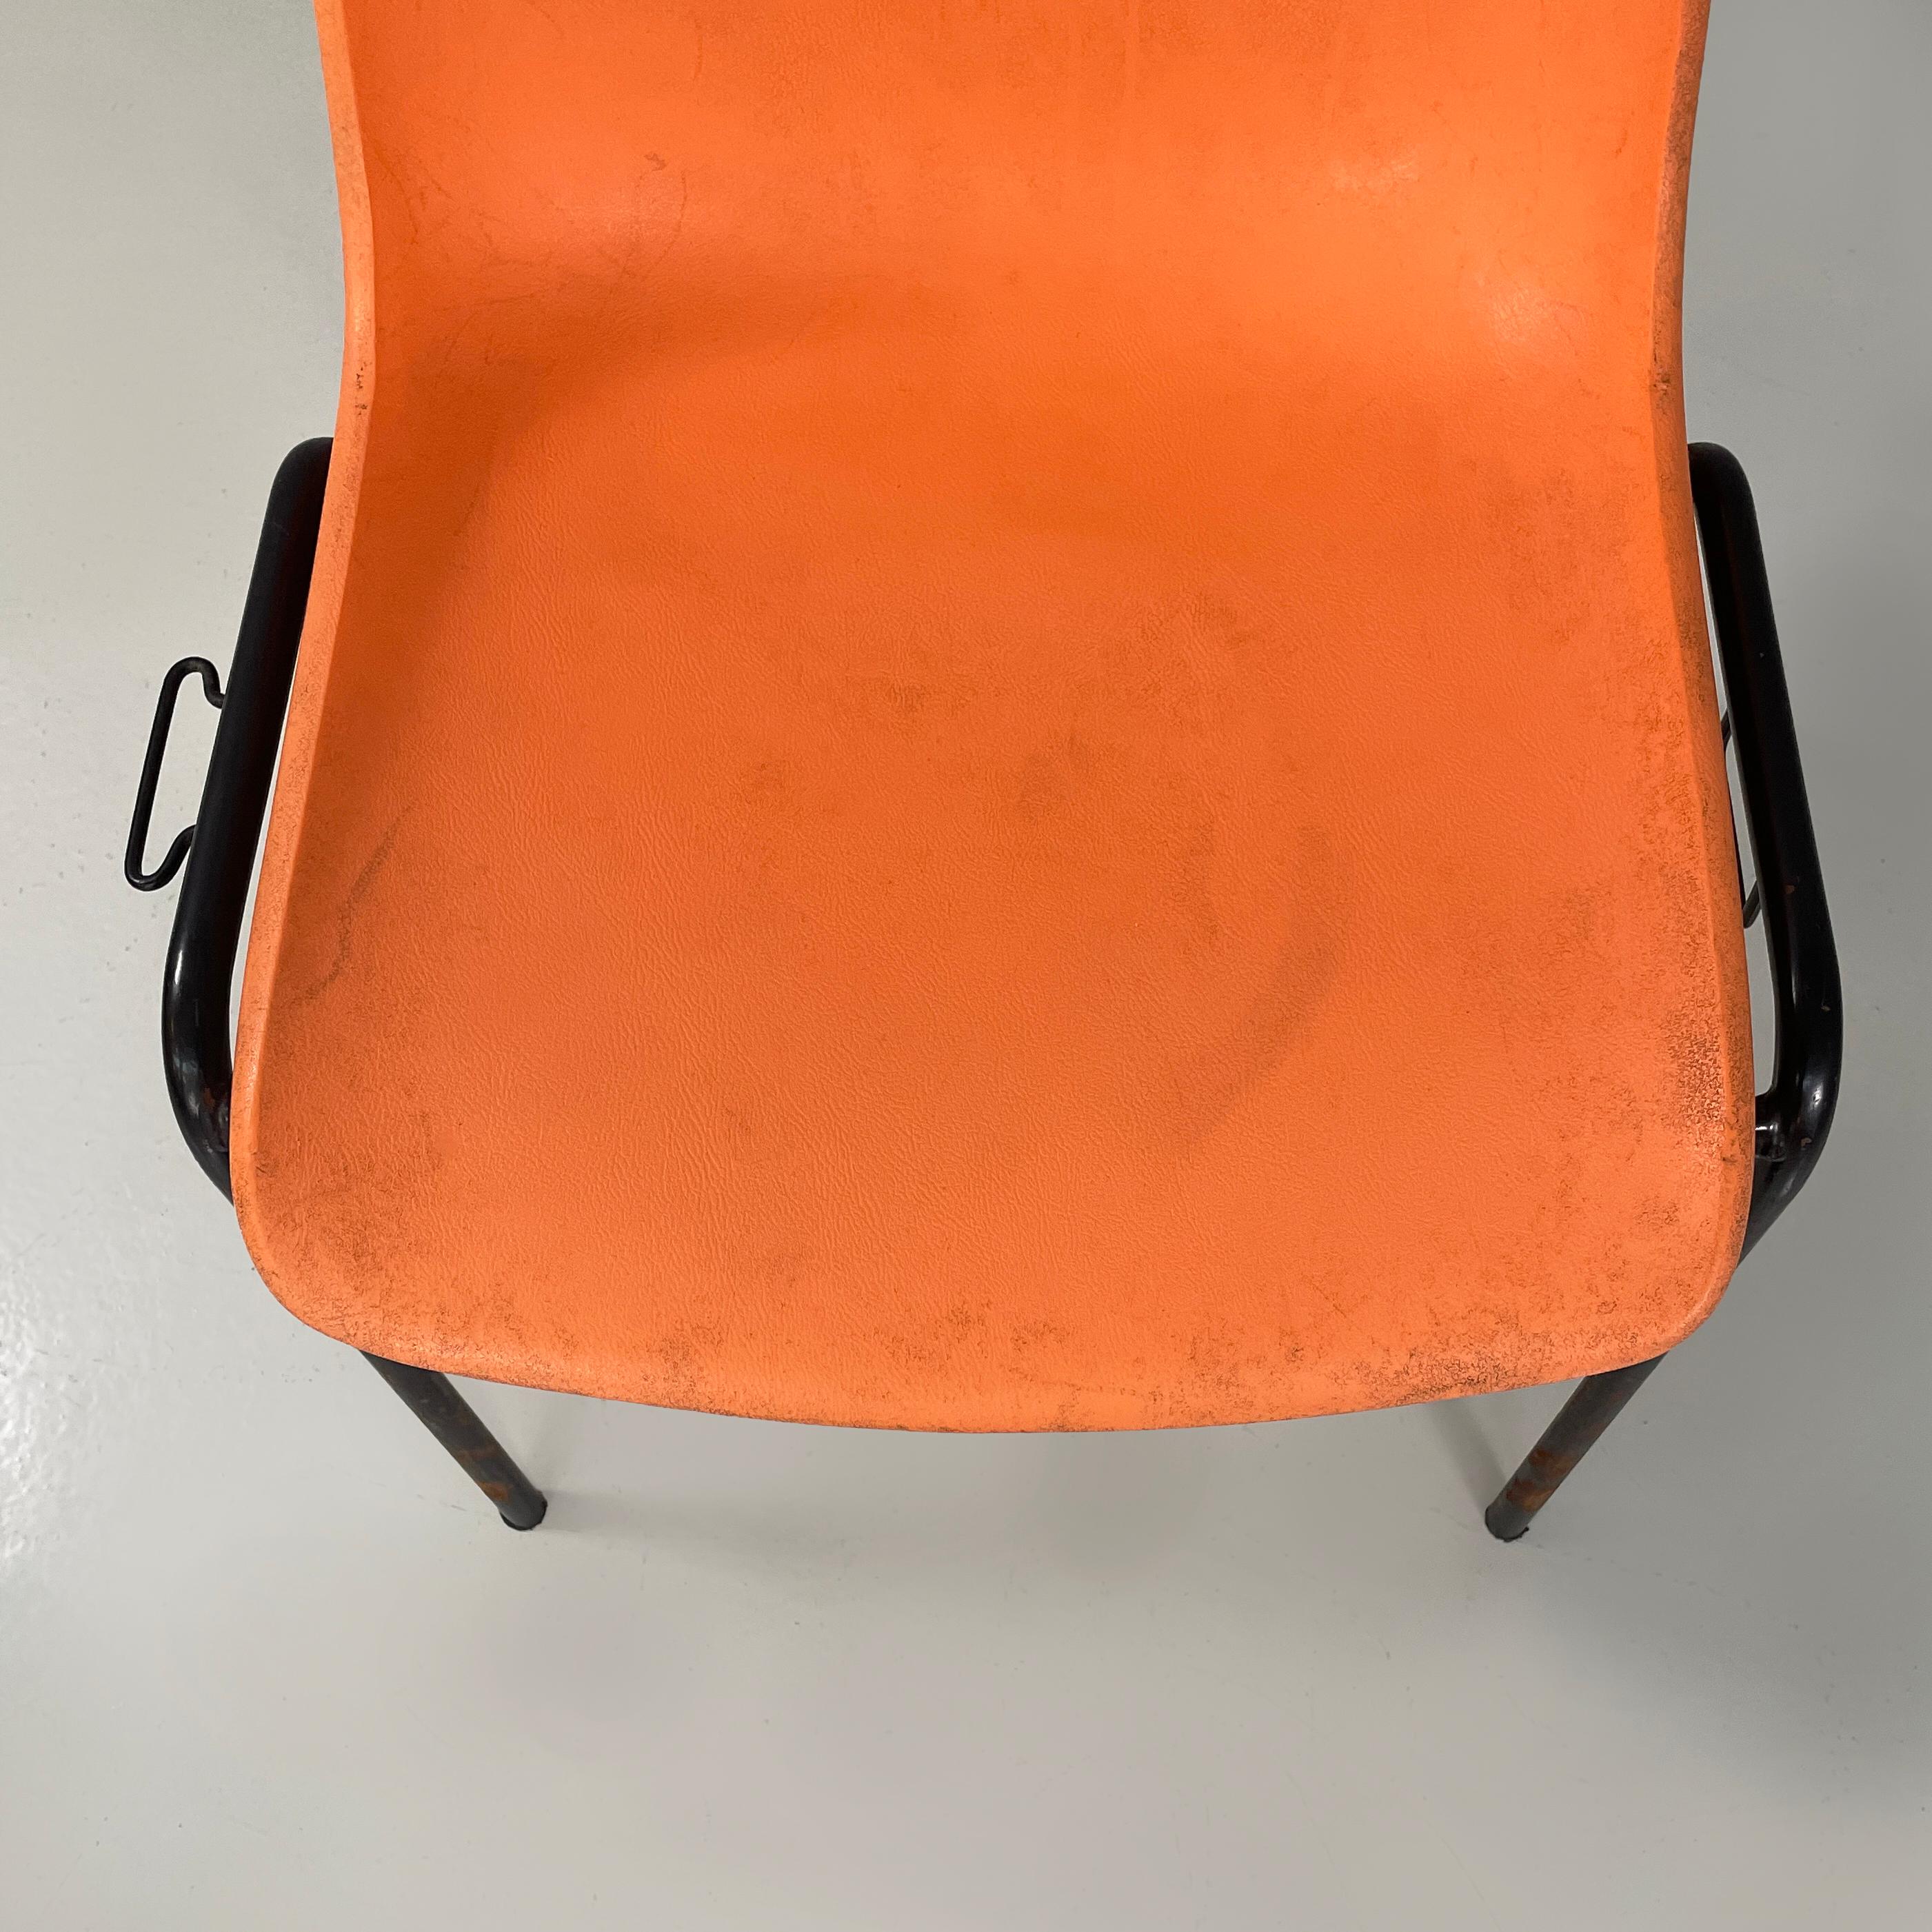 Italian modern Stackable chairs in orange plastic and black metal, 2001 For Sale 7